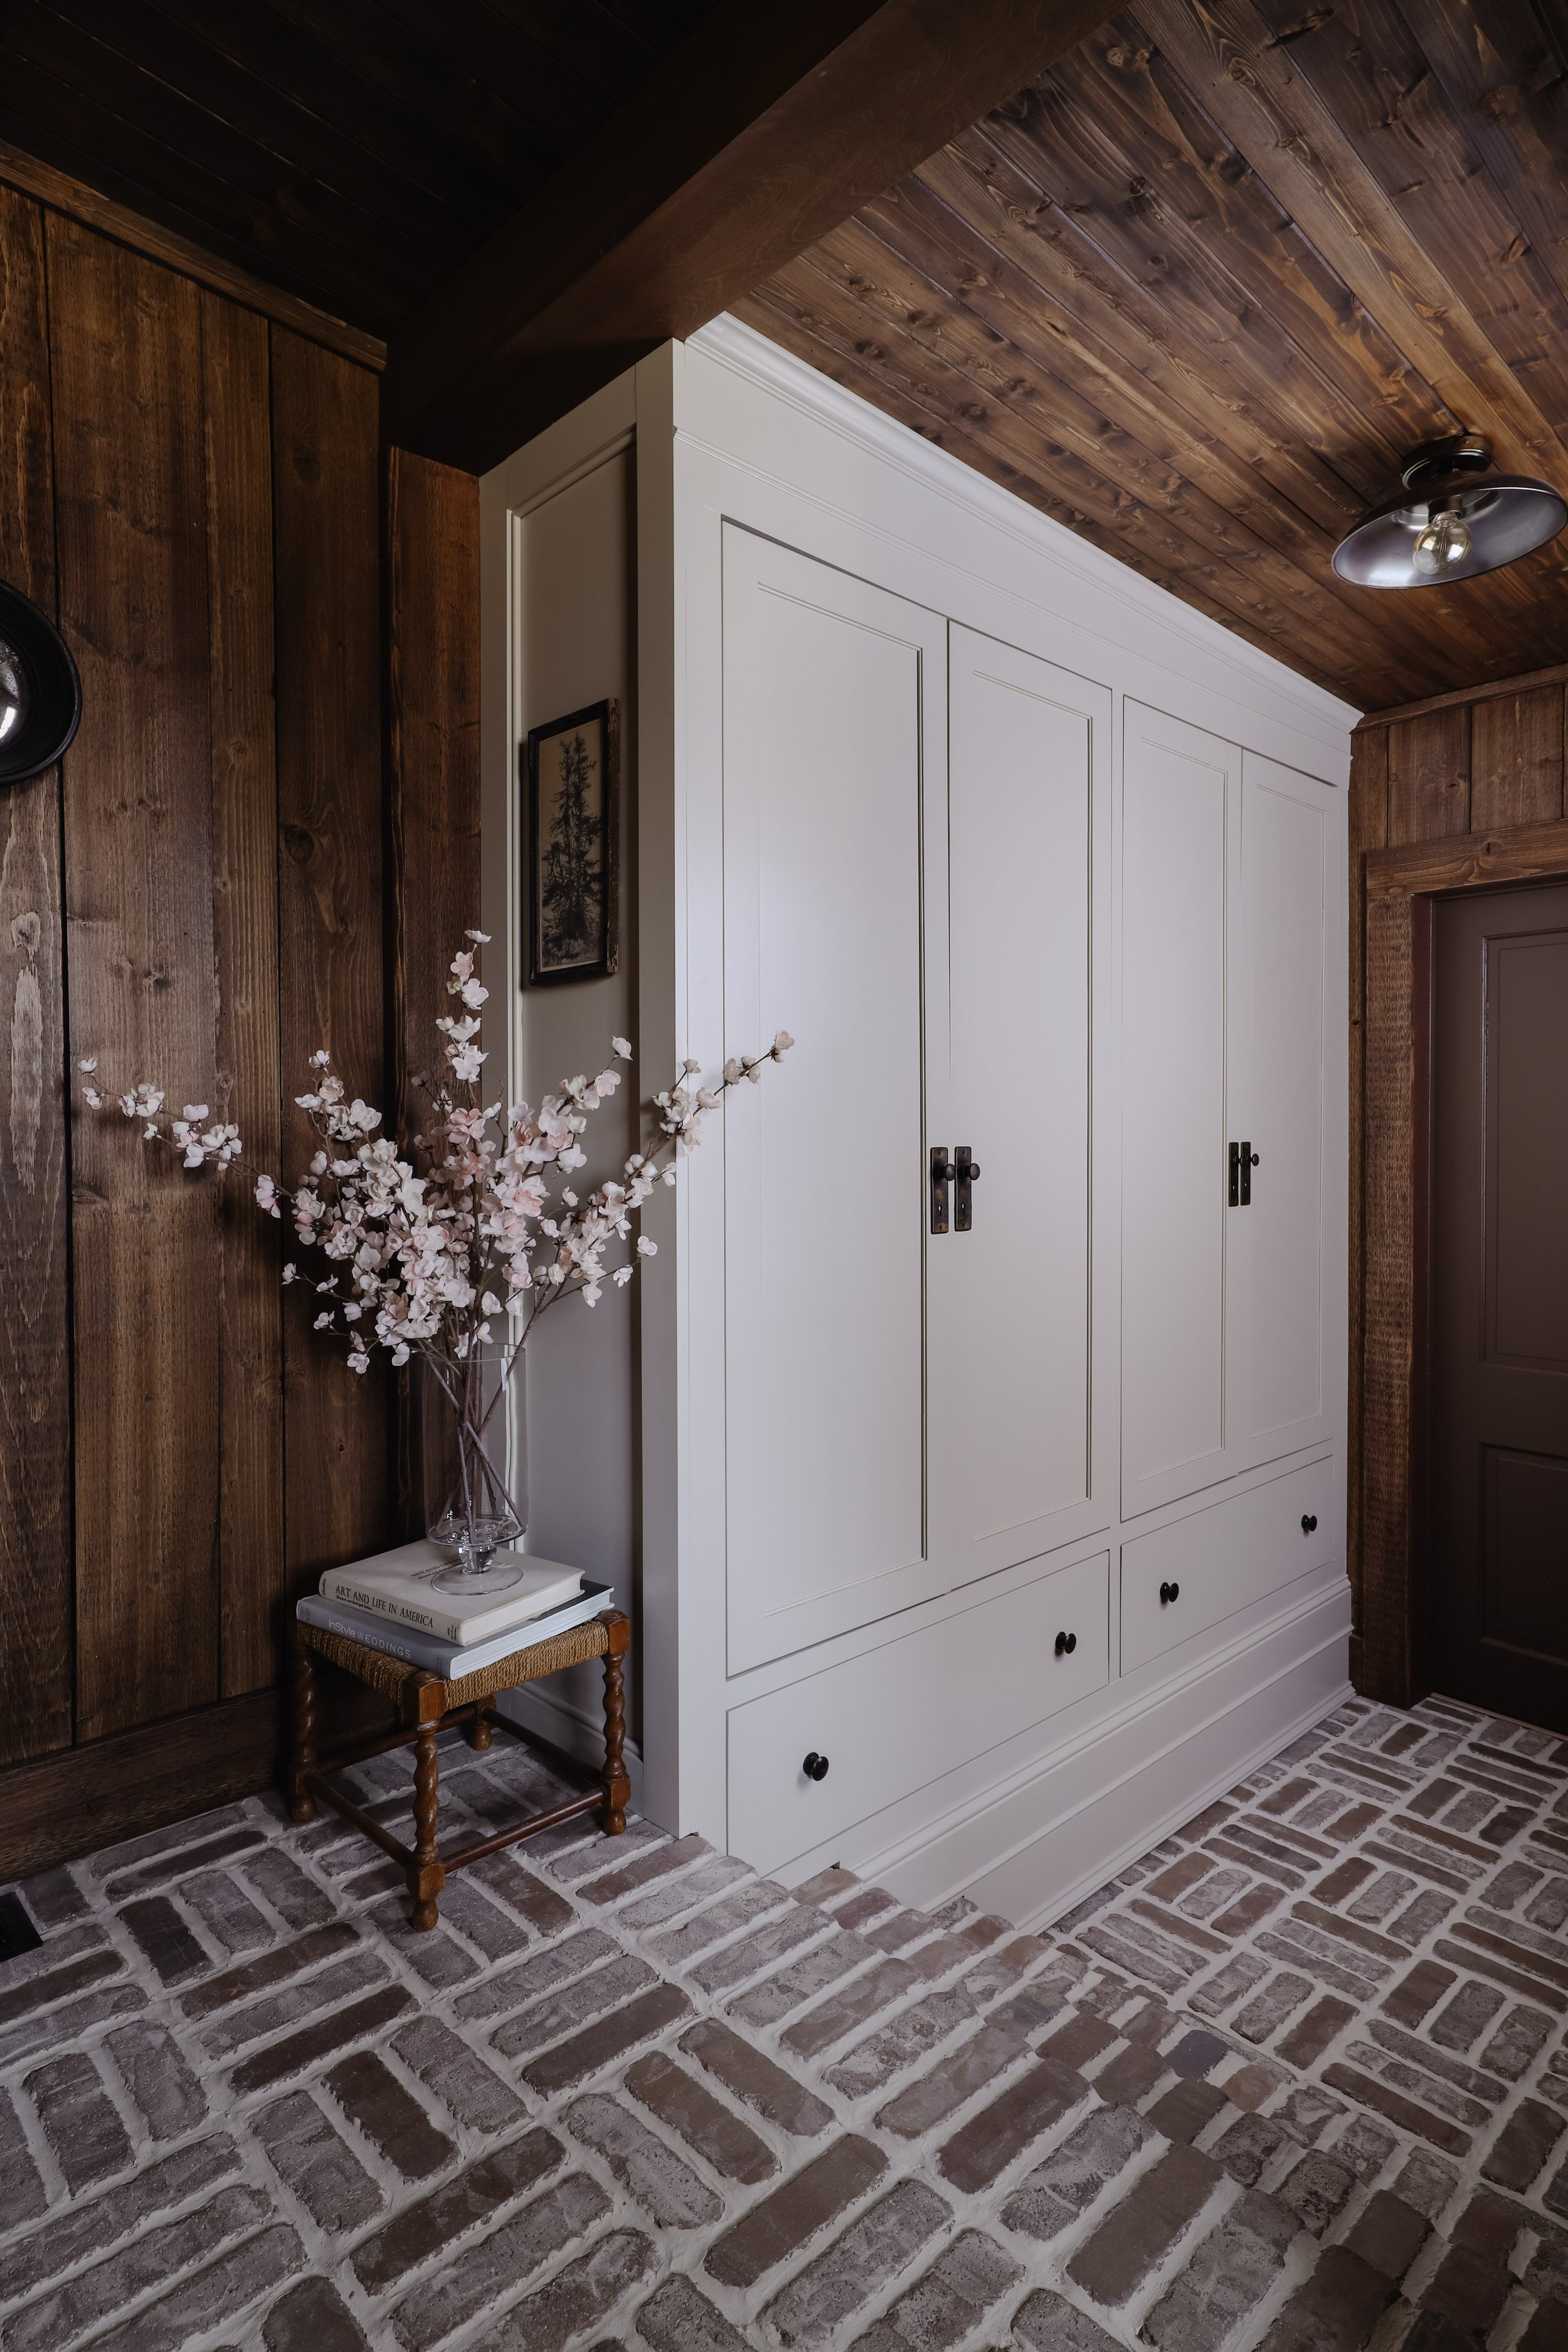 Rustic moody laundry room and mudroom. Dark wood walls. Basketweave brick floors in laundry room. Beige paint color for cabinets and brown paint color for doors. Built in closet for mud room. Nadine Stay